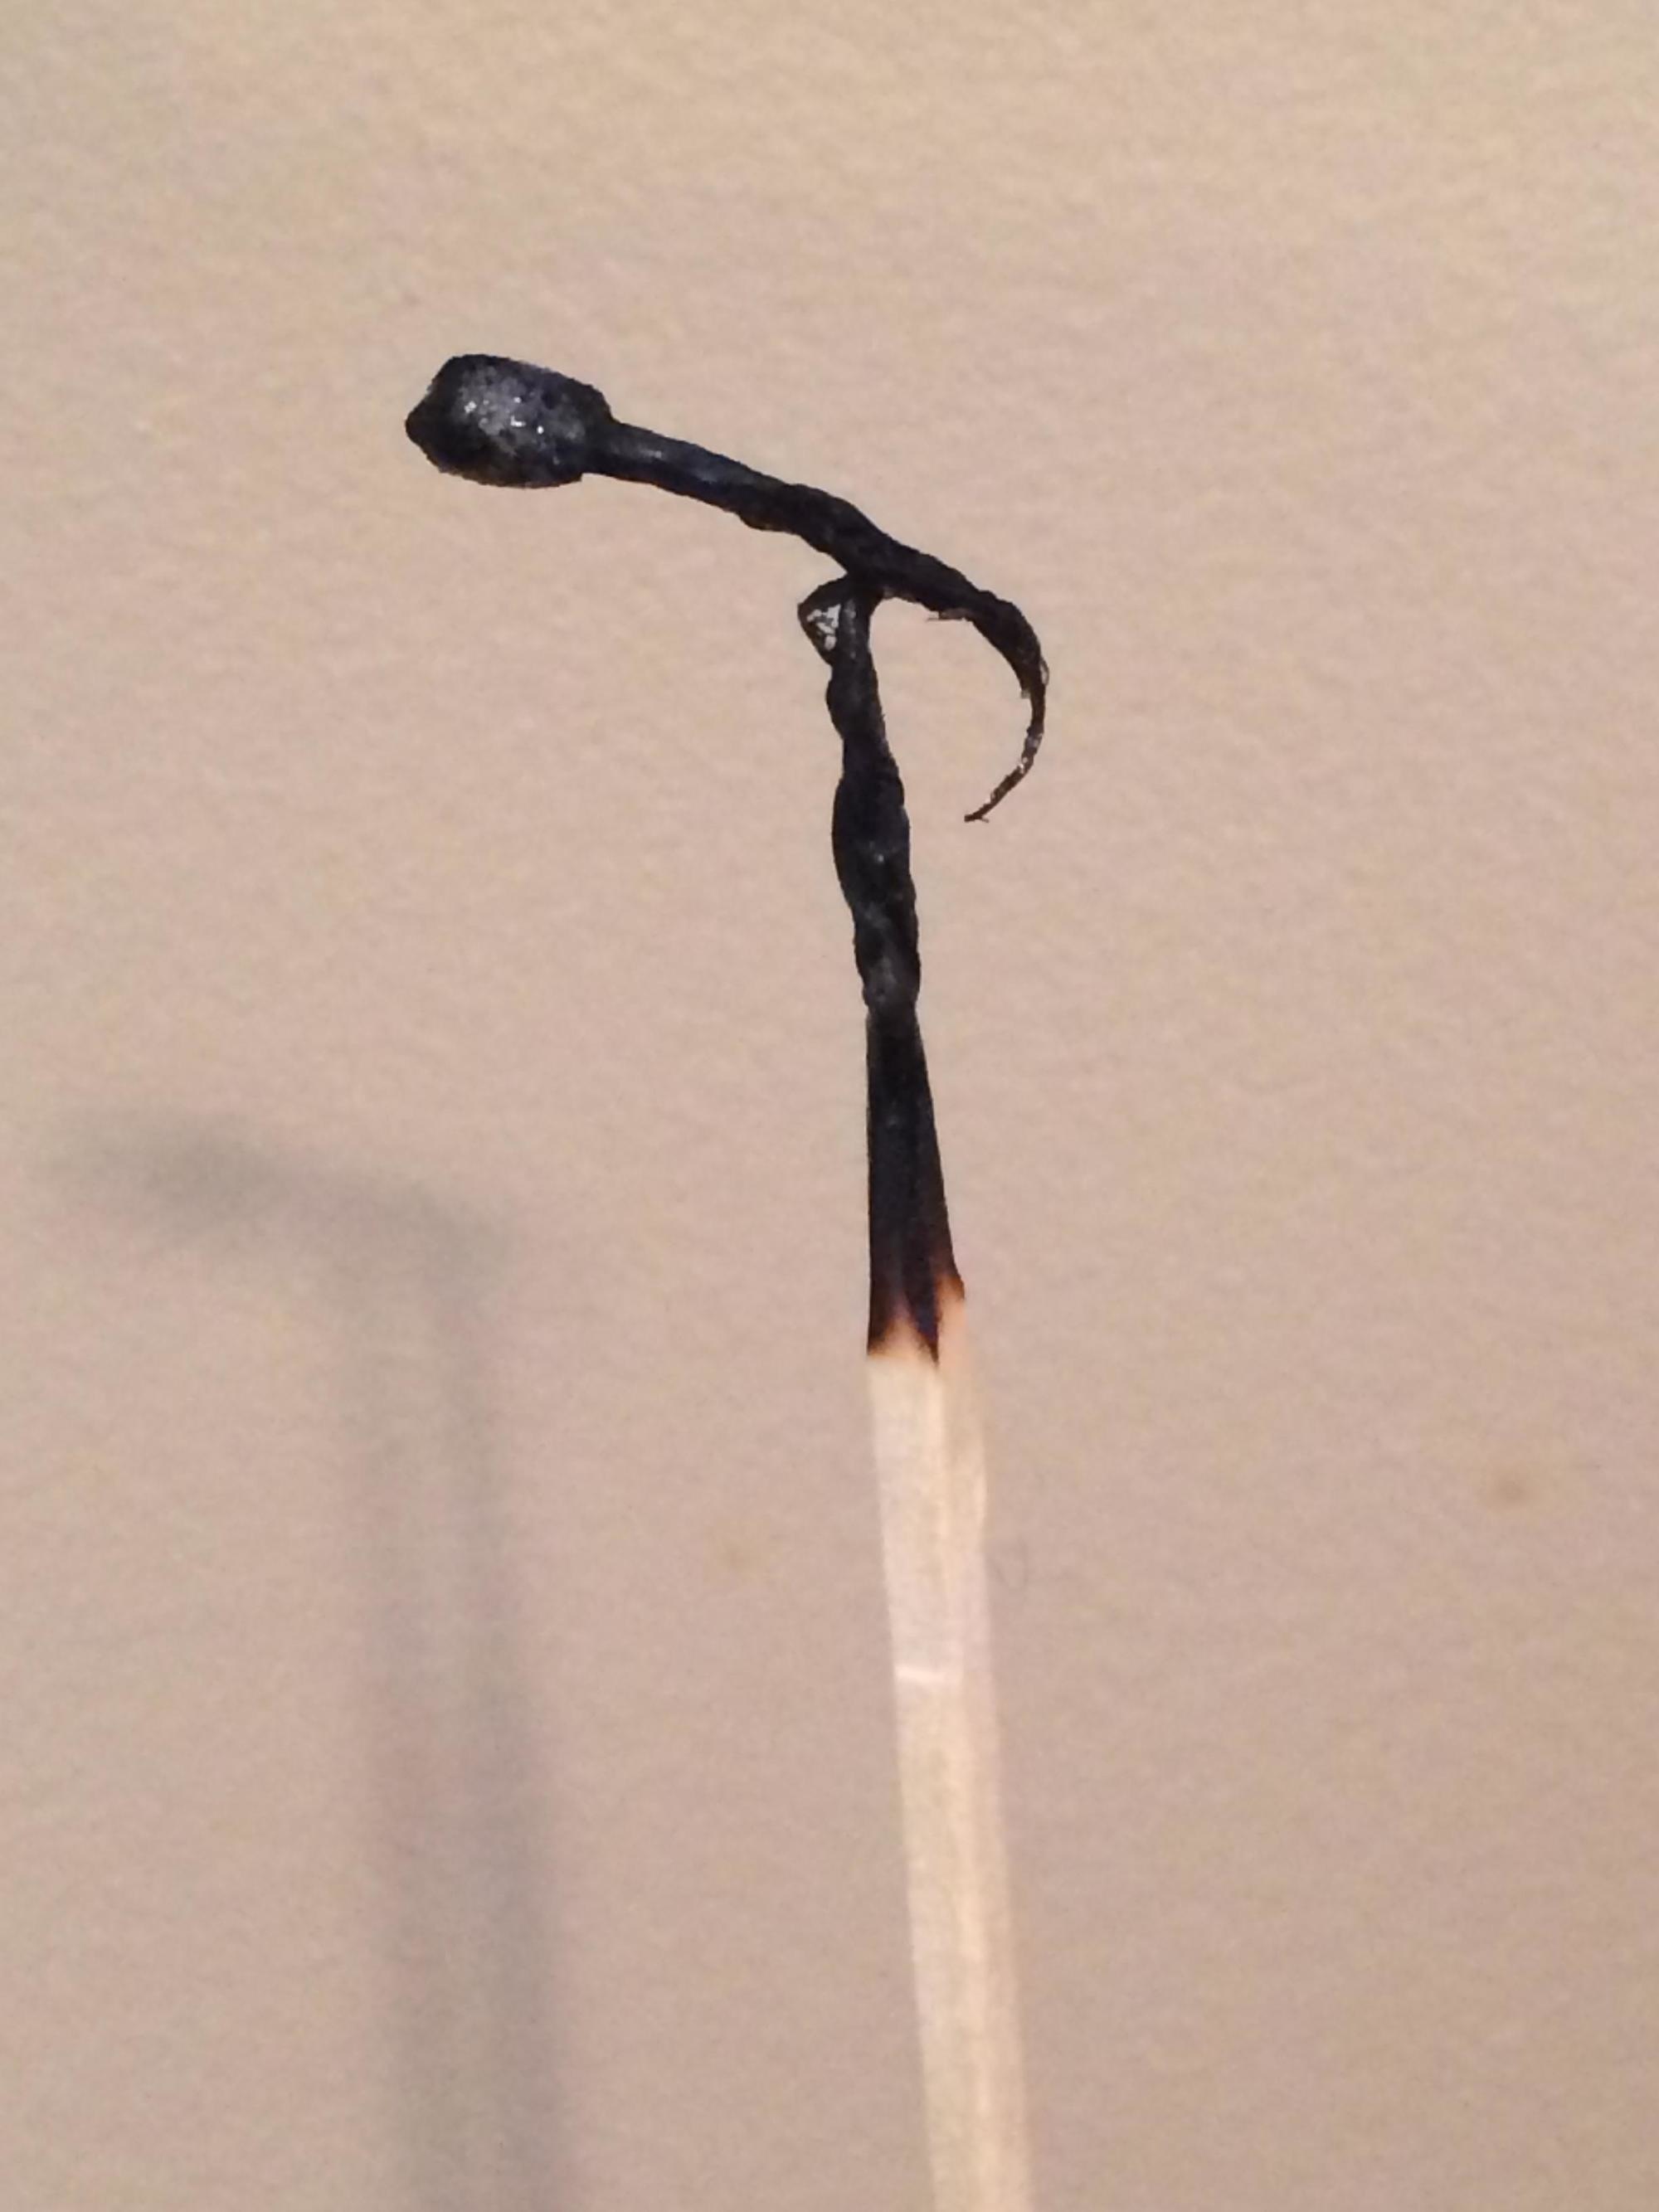 This burnt match is exactly like a mic stand.